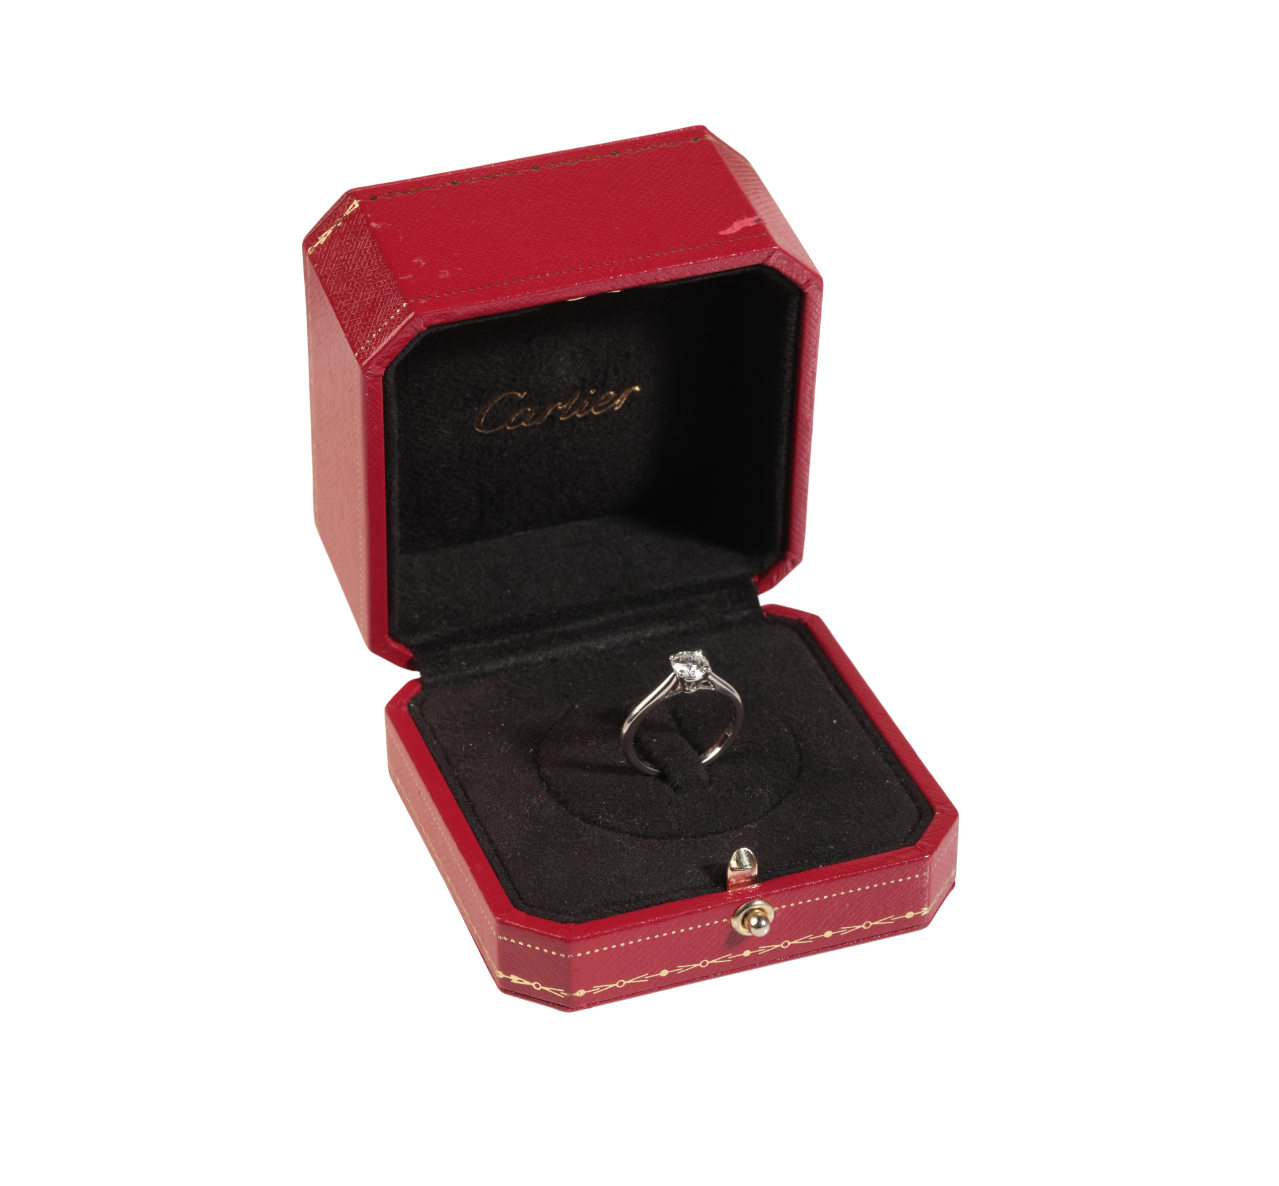 CARTIER: A VVS CLARITY DIAMOND SOLITAIRE RING - Image 2 of 2